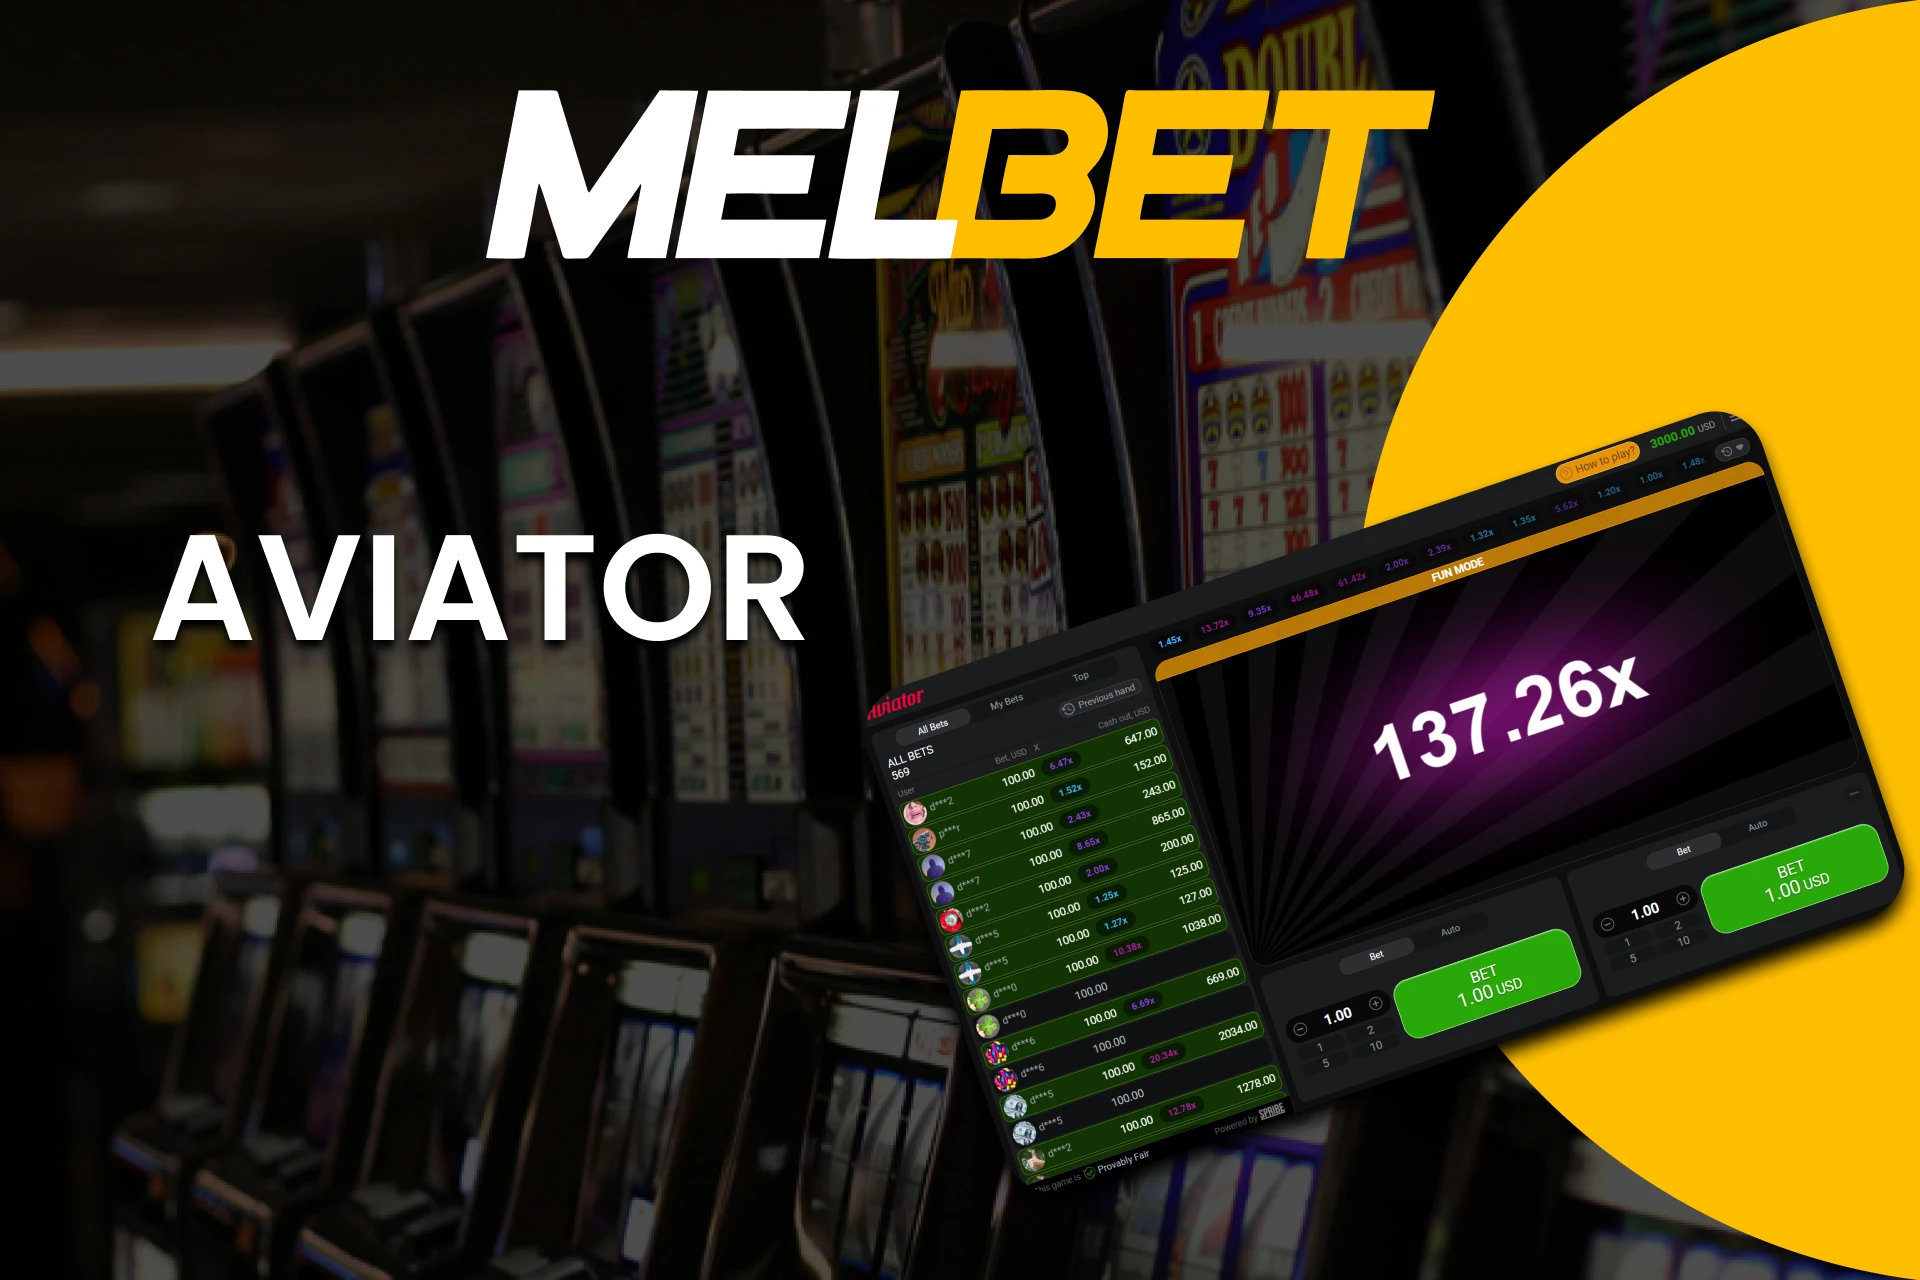 For games on Melbet, choose Aviator.